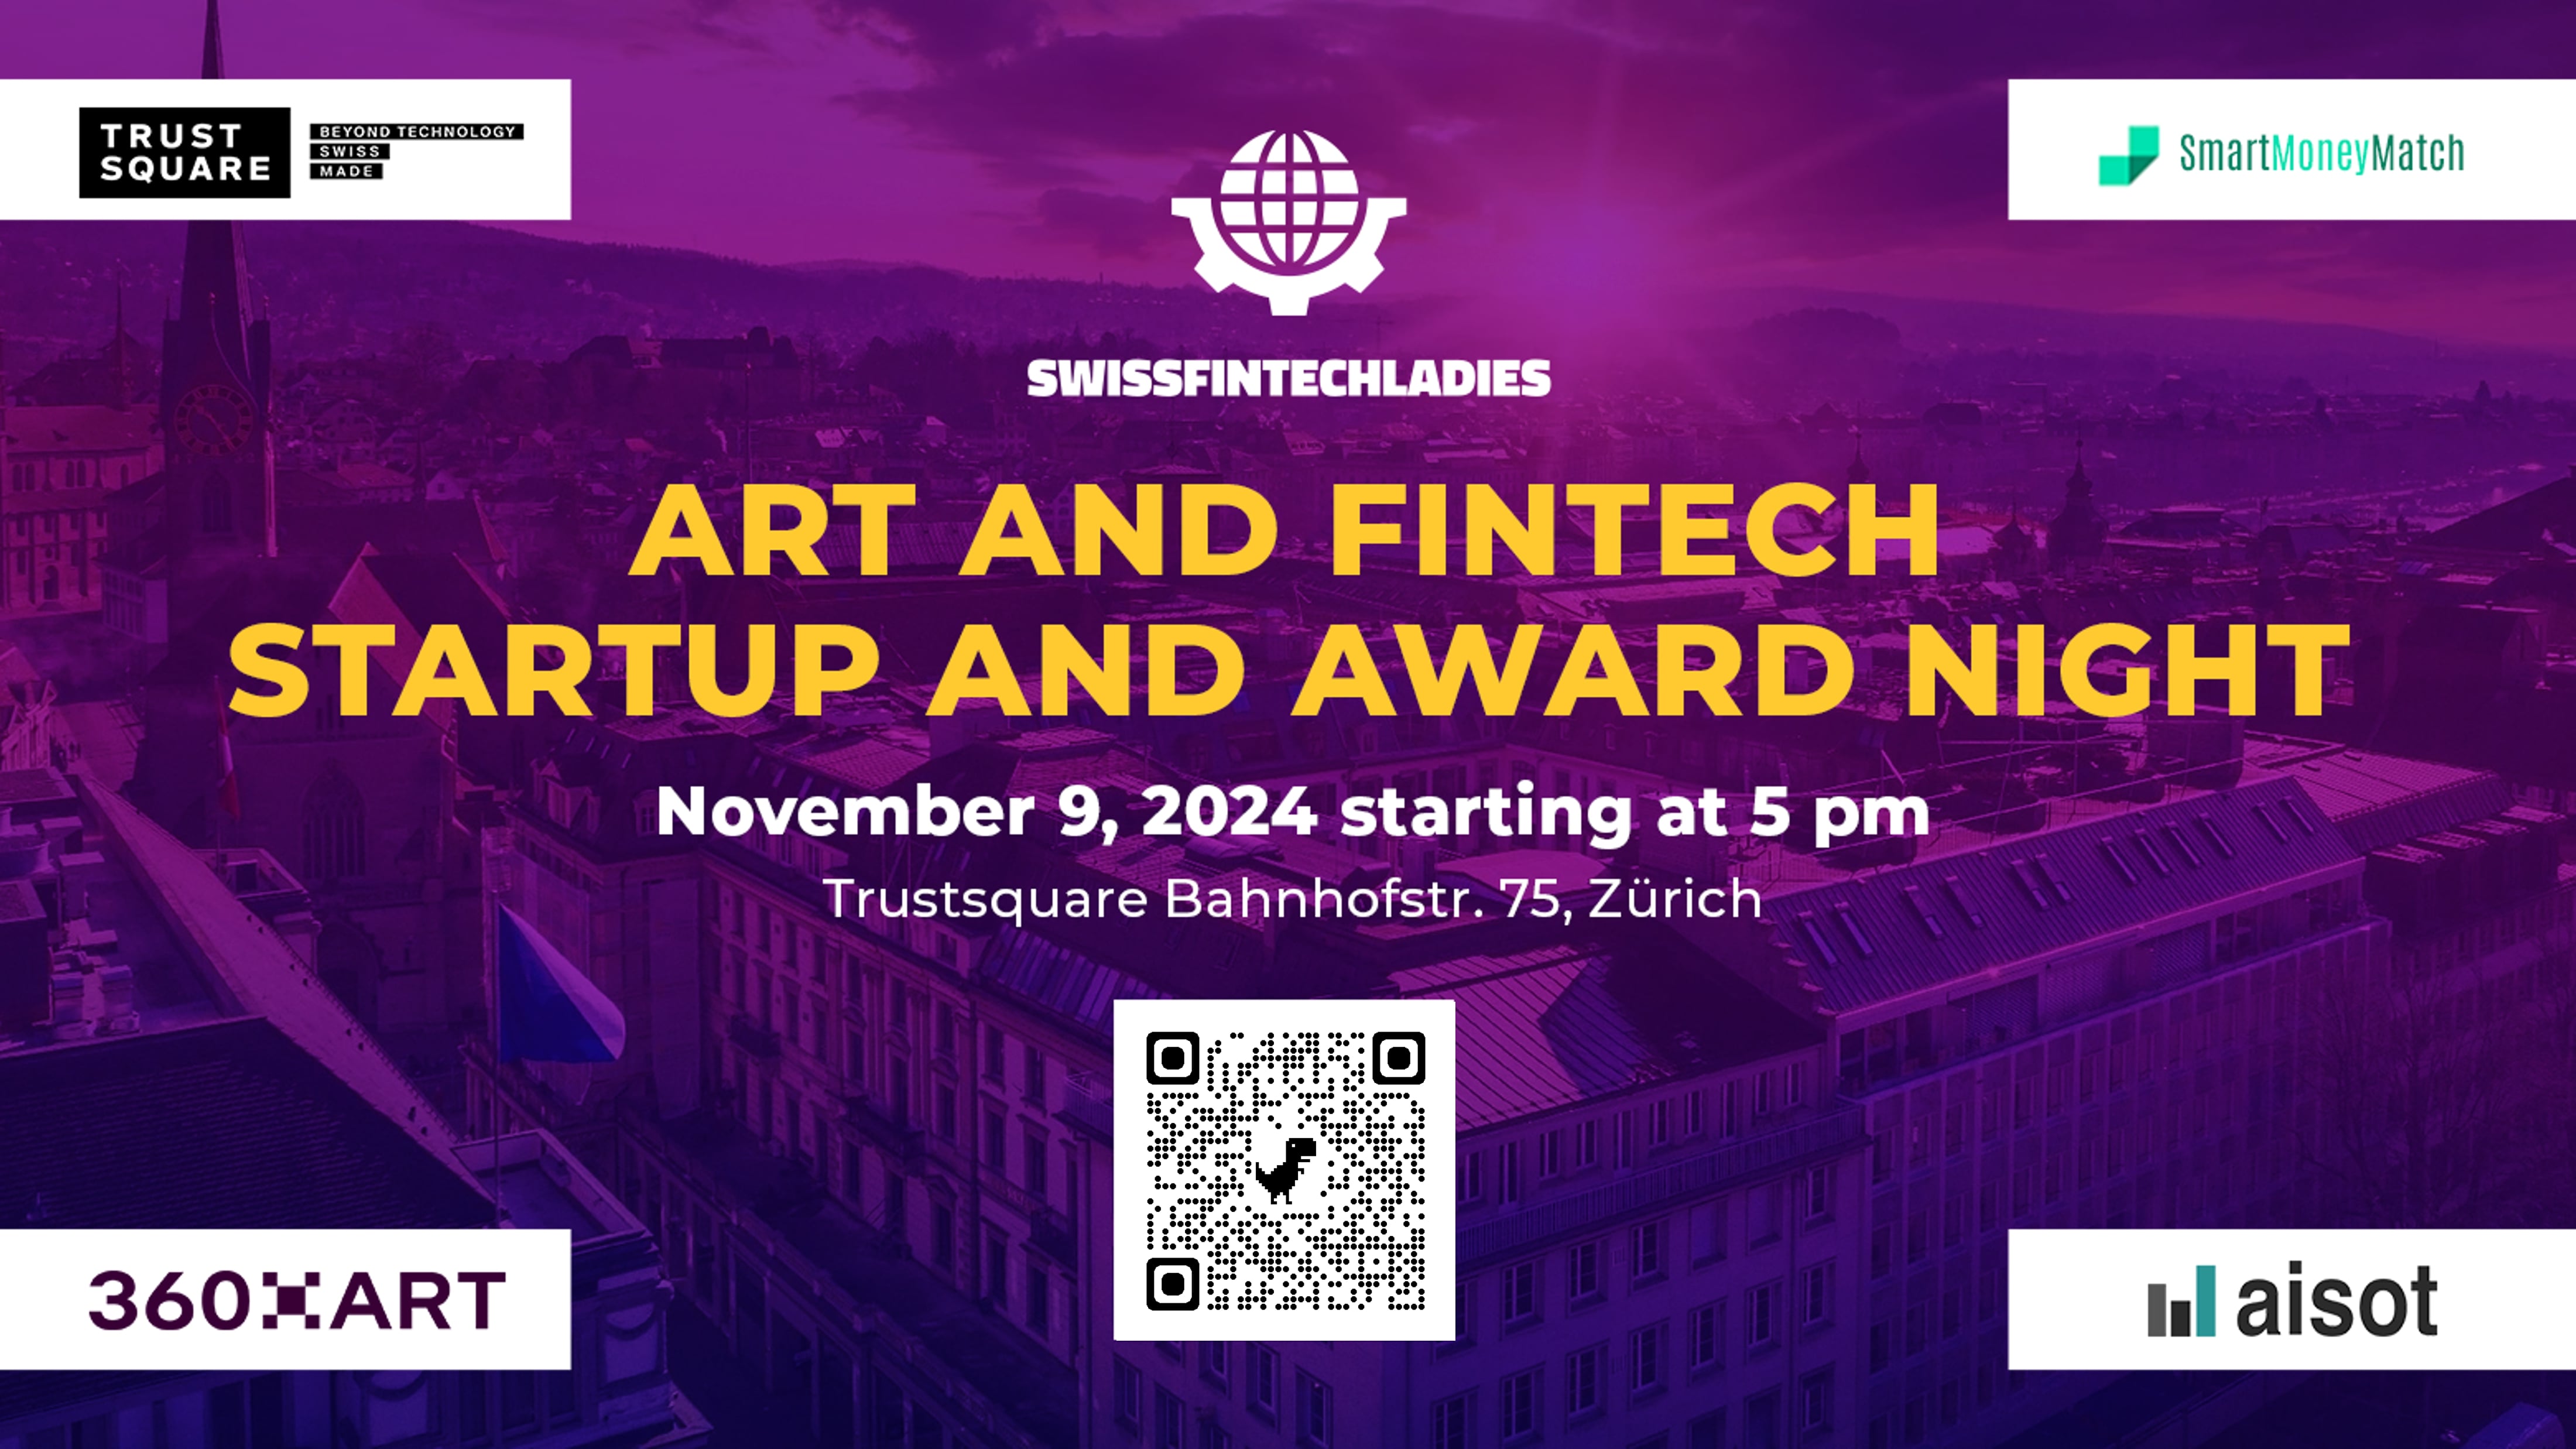 Art and Fintech Startup Award Night: Investors Artists and Startups Mingle organized by SwissFinTechLadies